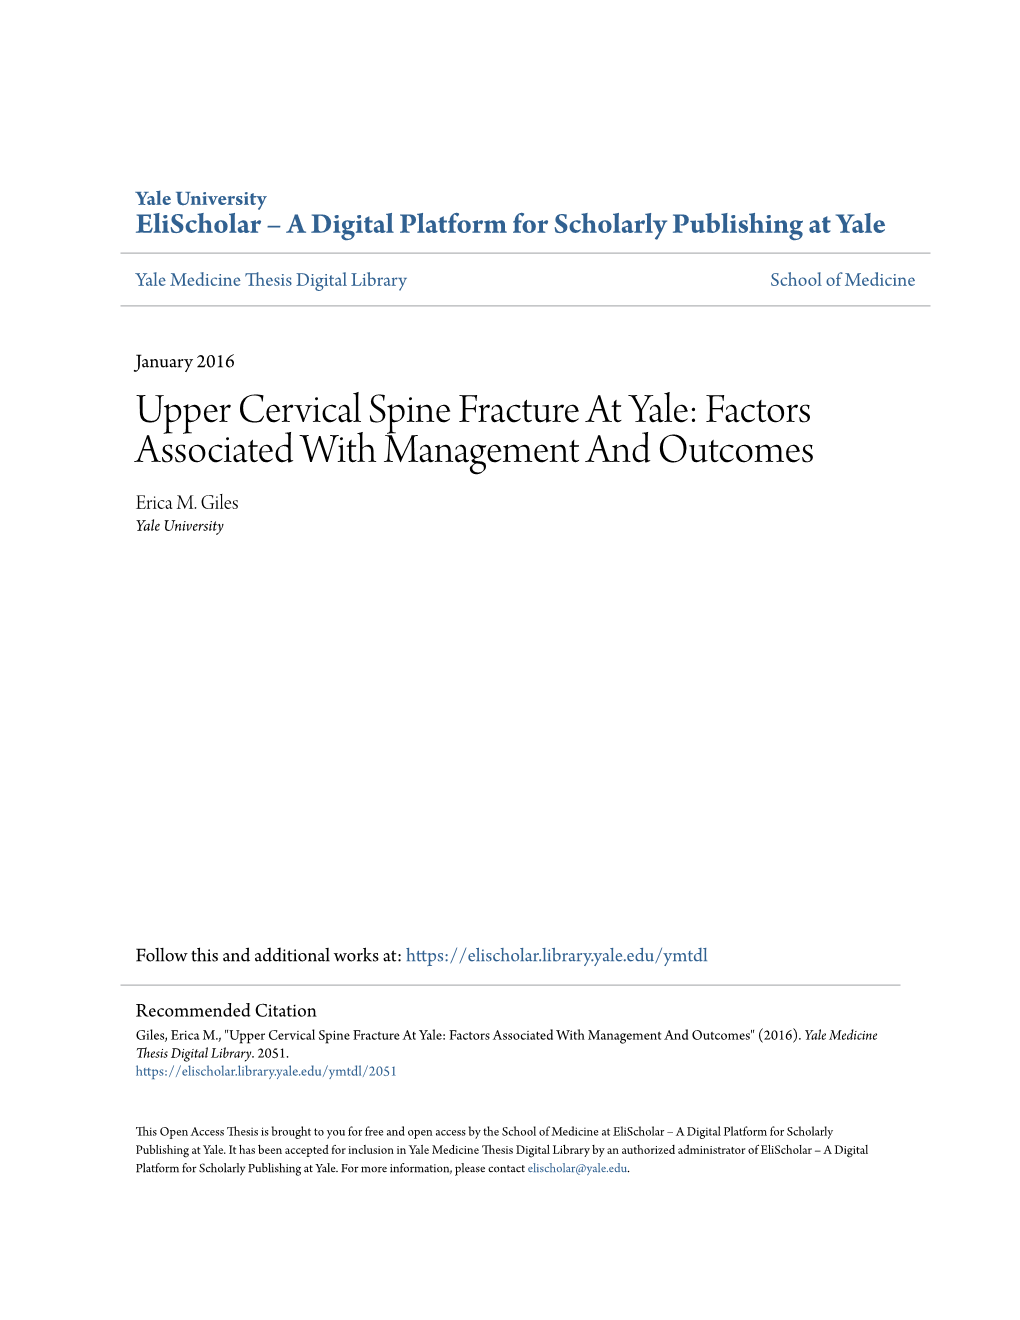 Upper Cervical Spine Fracture at Yale: Factors Associated with Management and Outcomes Erica M